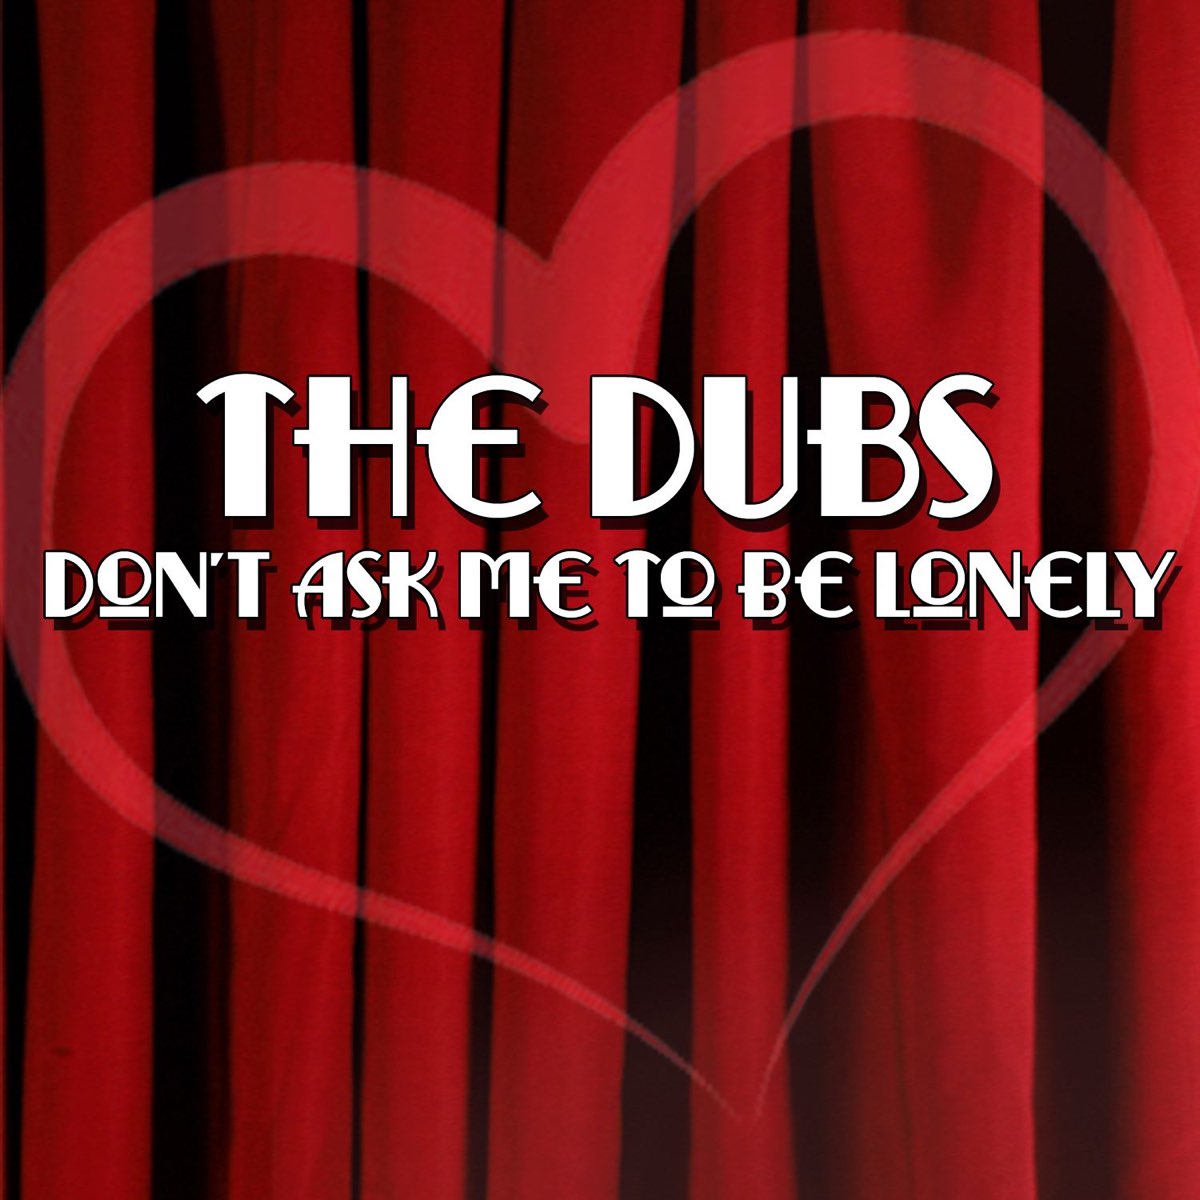 Dubs. Just ask the Lonely. Dont ask